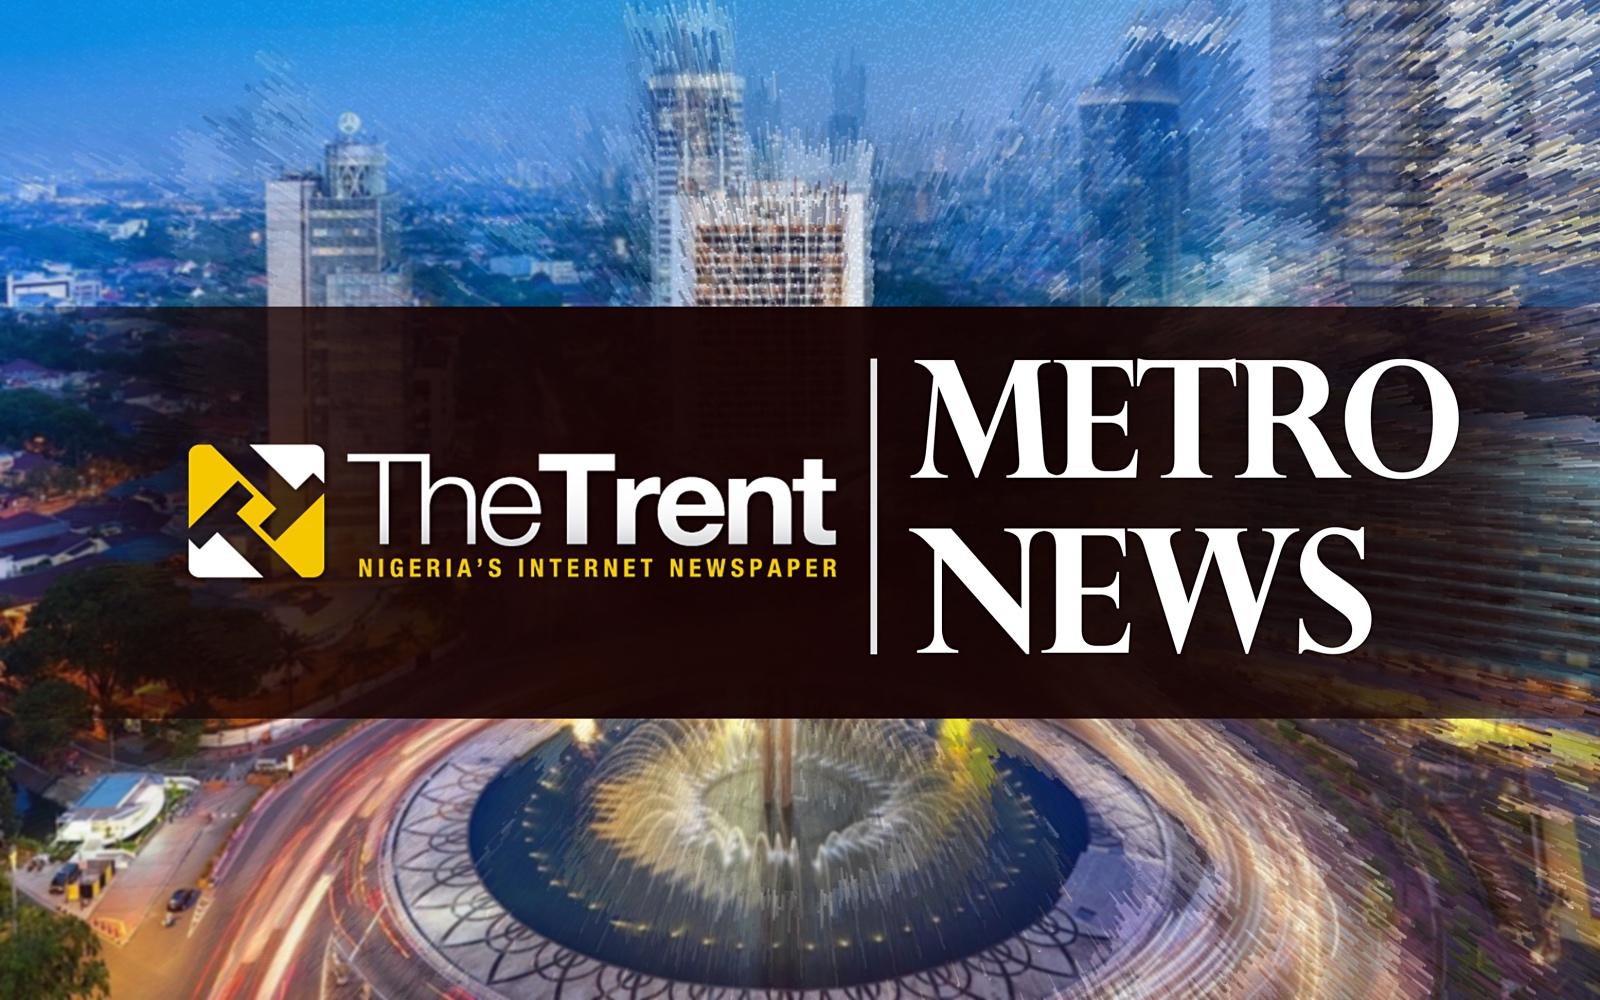 married woman Baby, the trent metro news